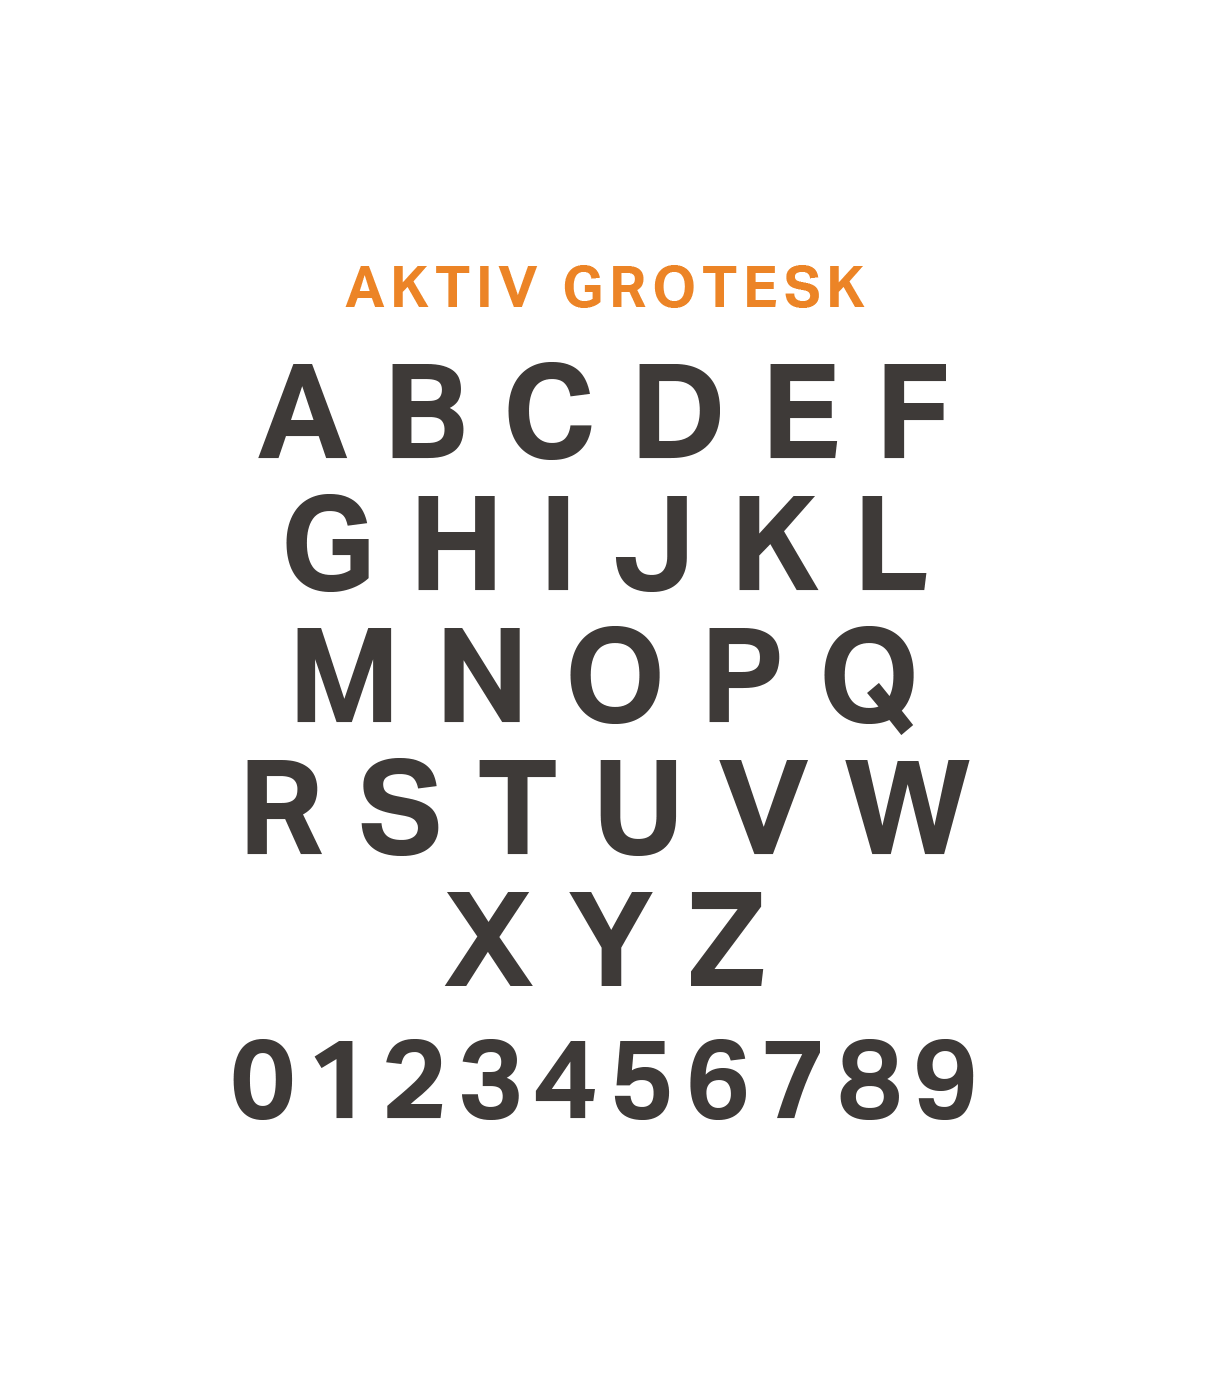 Aktiv Grotesk brand font showcasing all the characters